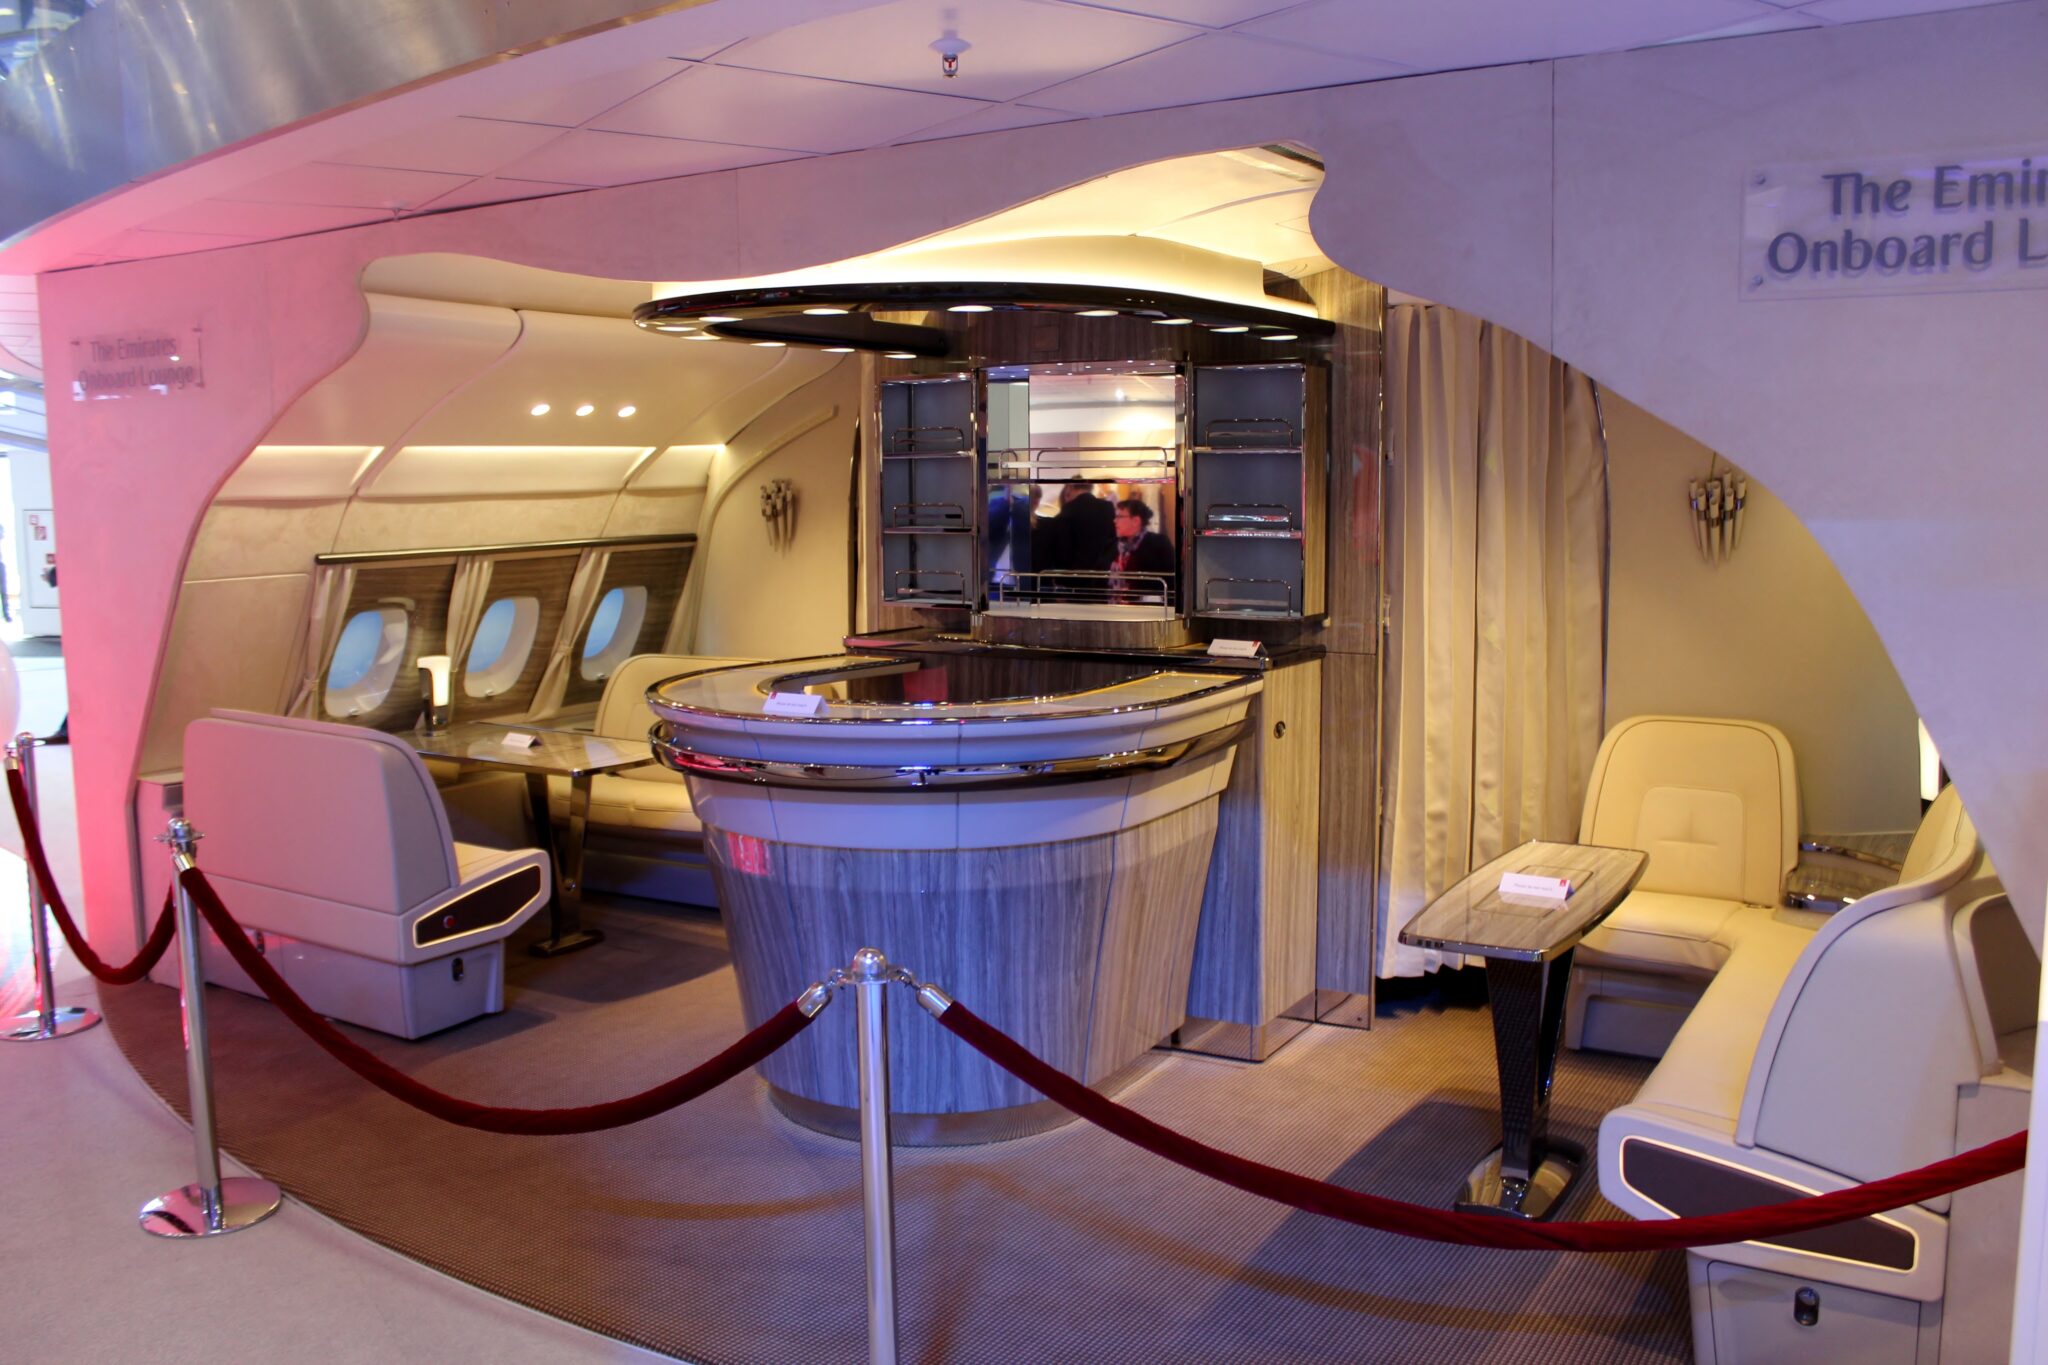 Photos: The new Emirates business class bar on the Airbus A380